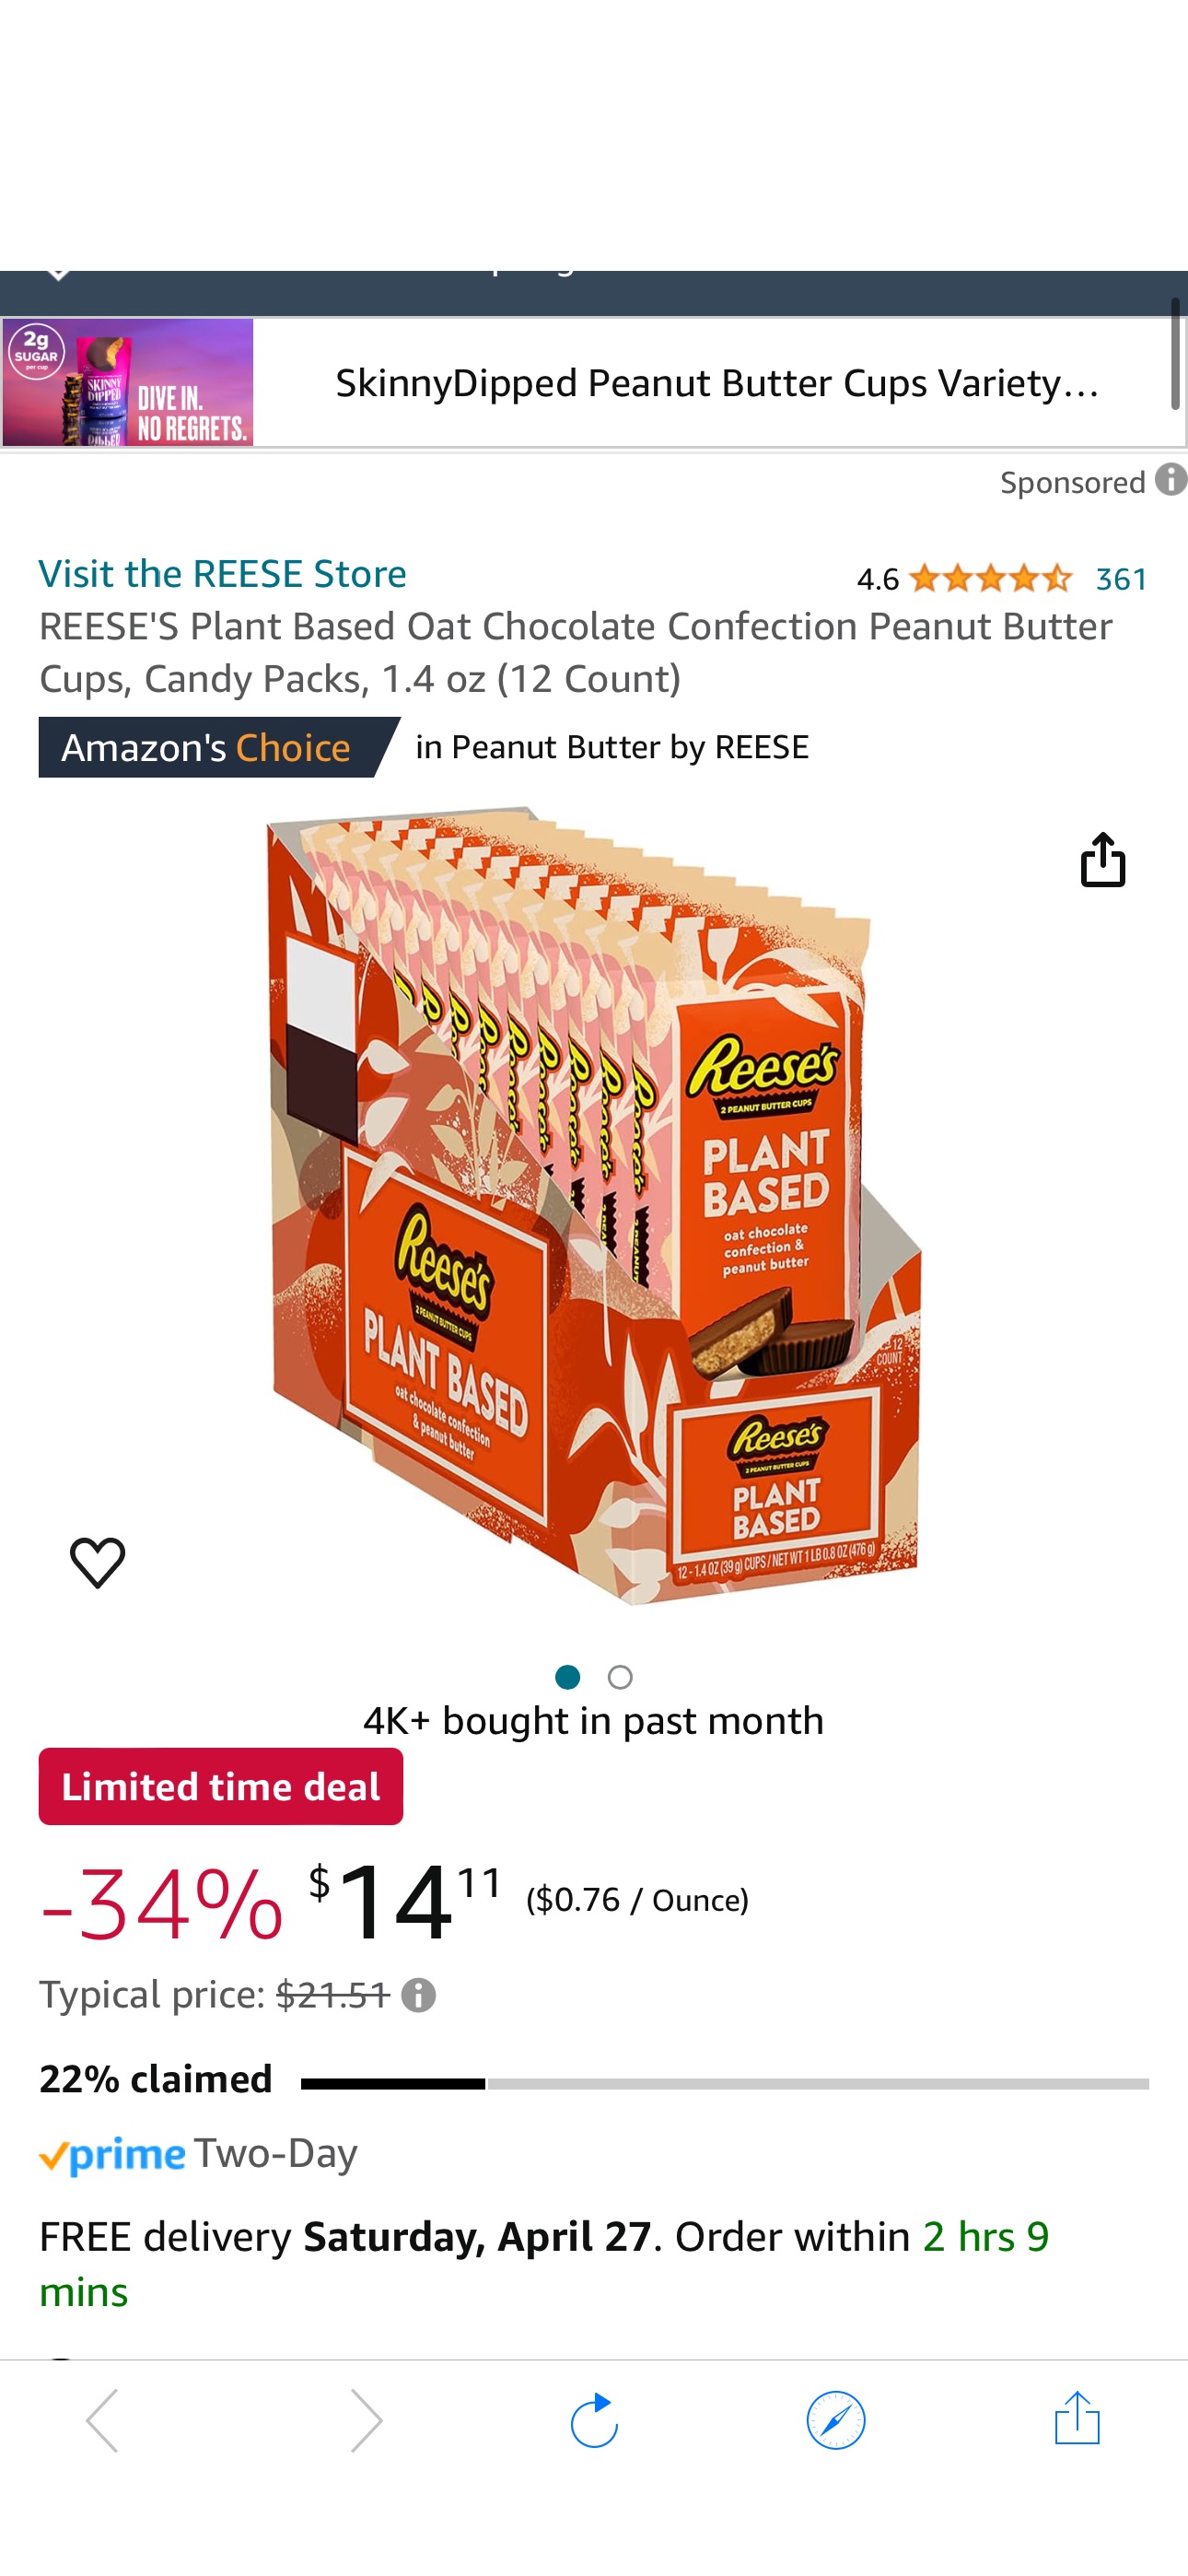 Amazon.com : REESE'S Plant Based Oat Chocolate Confection Peanut Butter Cups, Candy Packs, 1.4 oz (12 Count) : Grocery & Gourmet Food